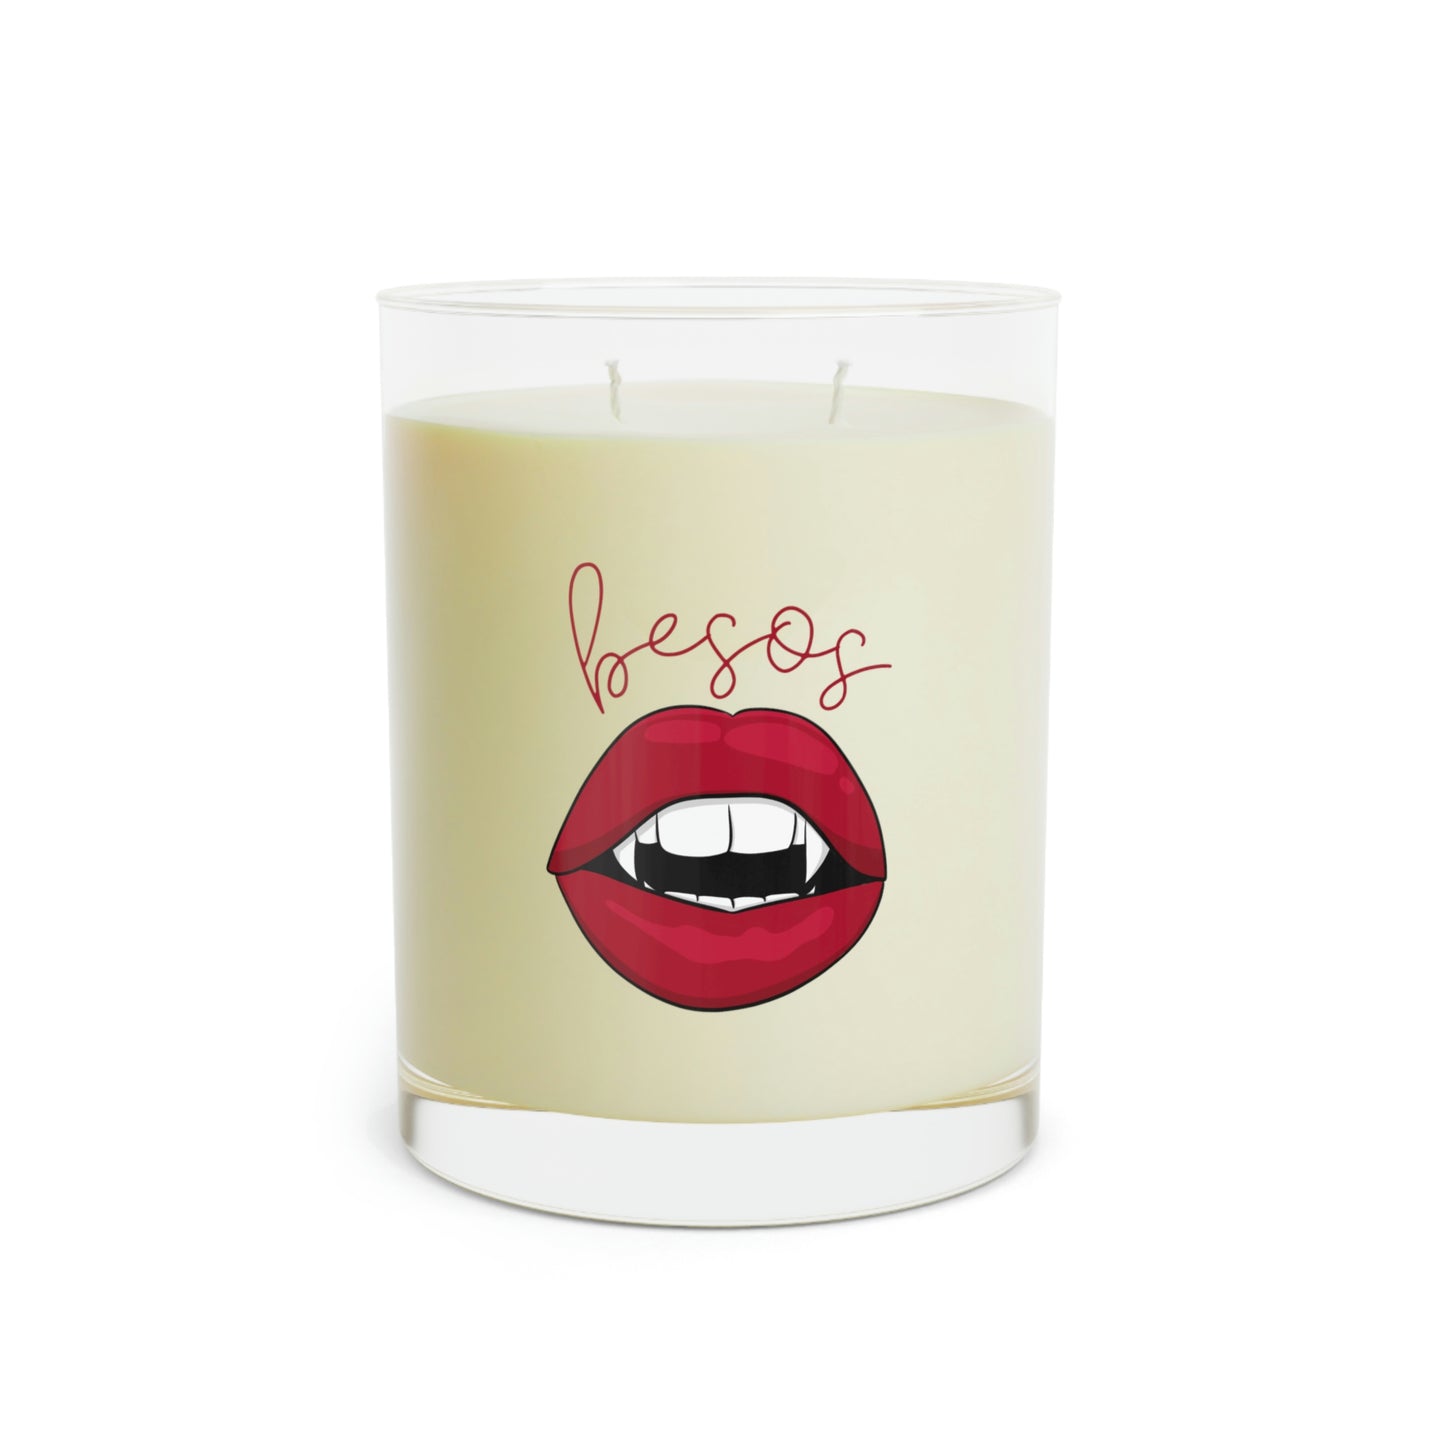 Besos Scented Candle - Full Glass, 11oz